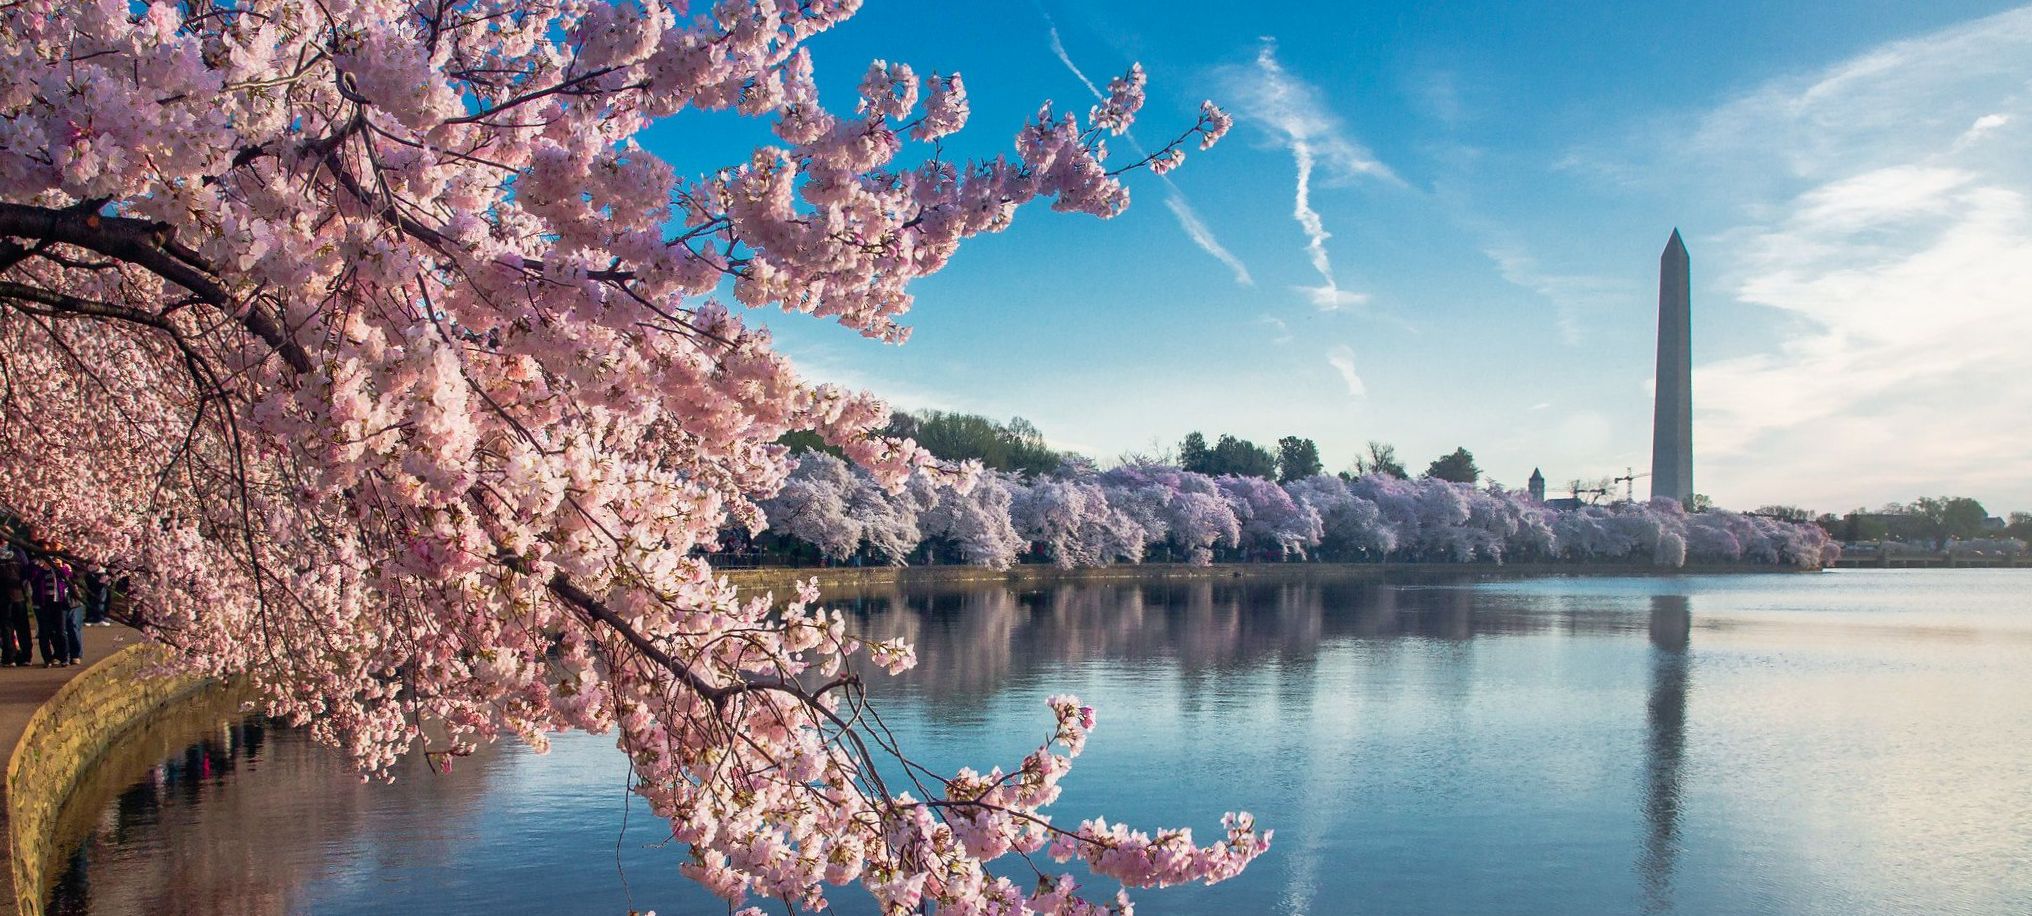 Yoshino cherry trees line the Tidal Basin in the Nation's Capital.